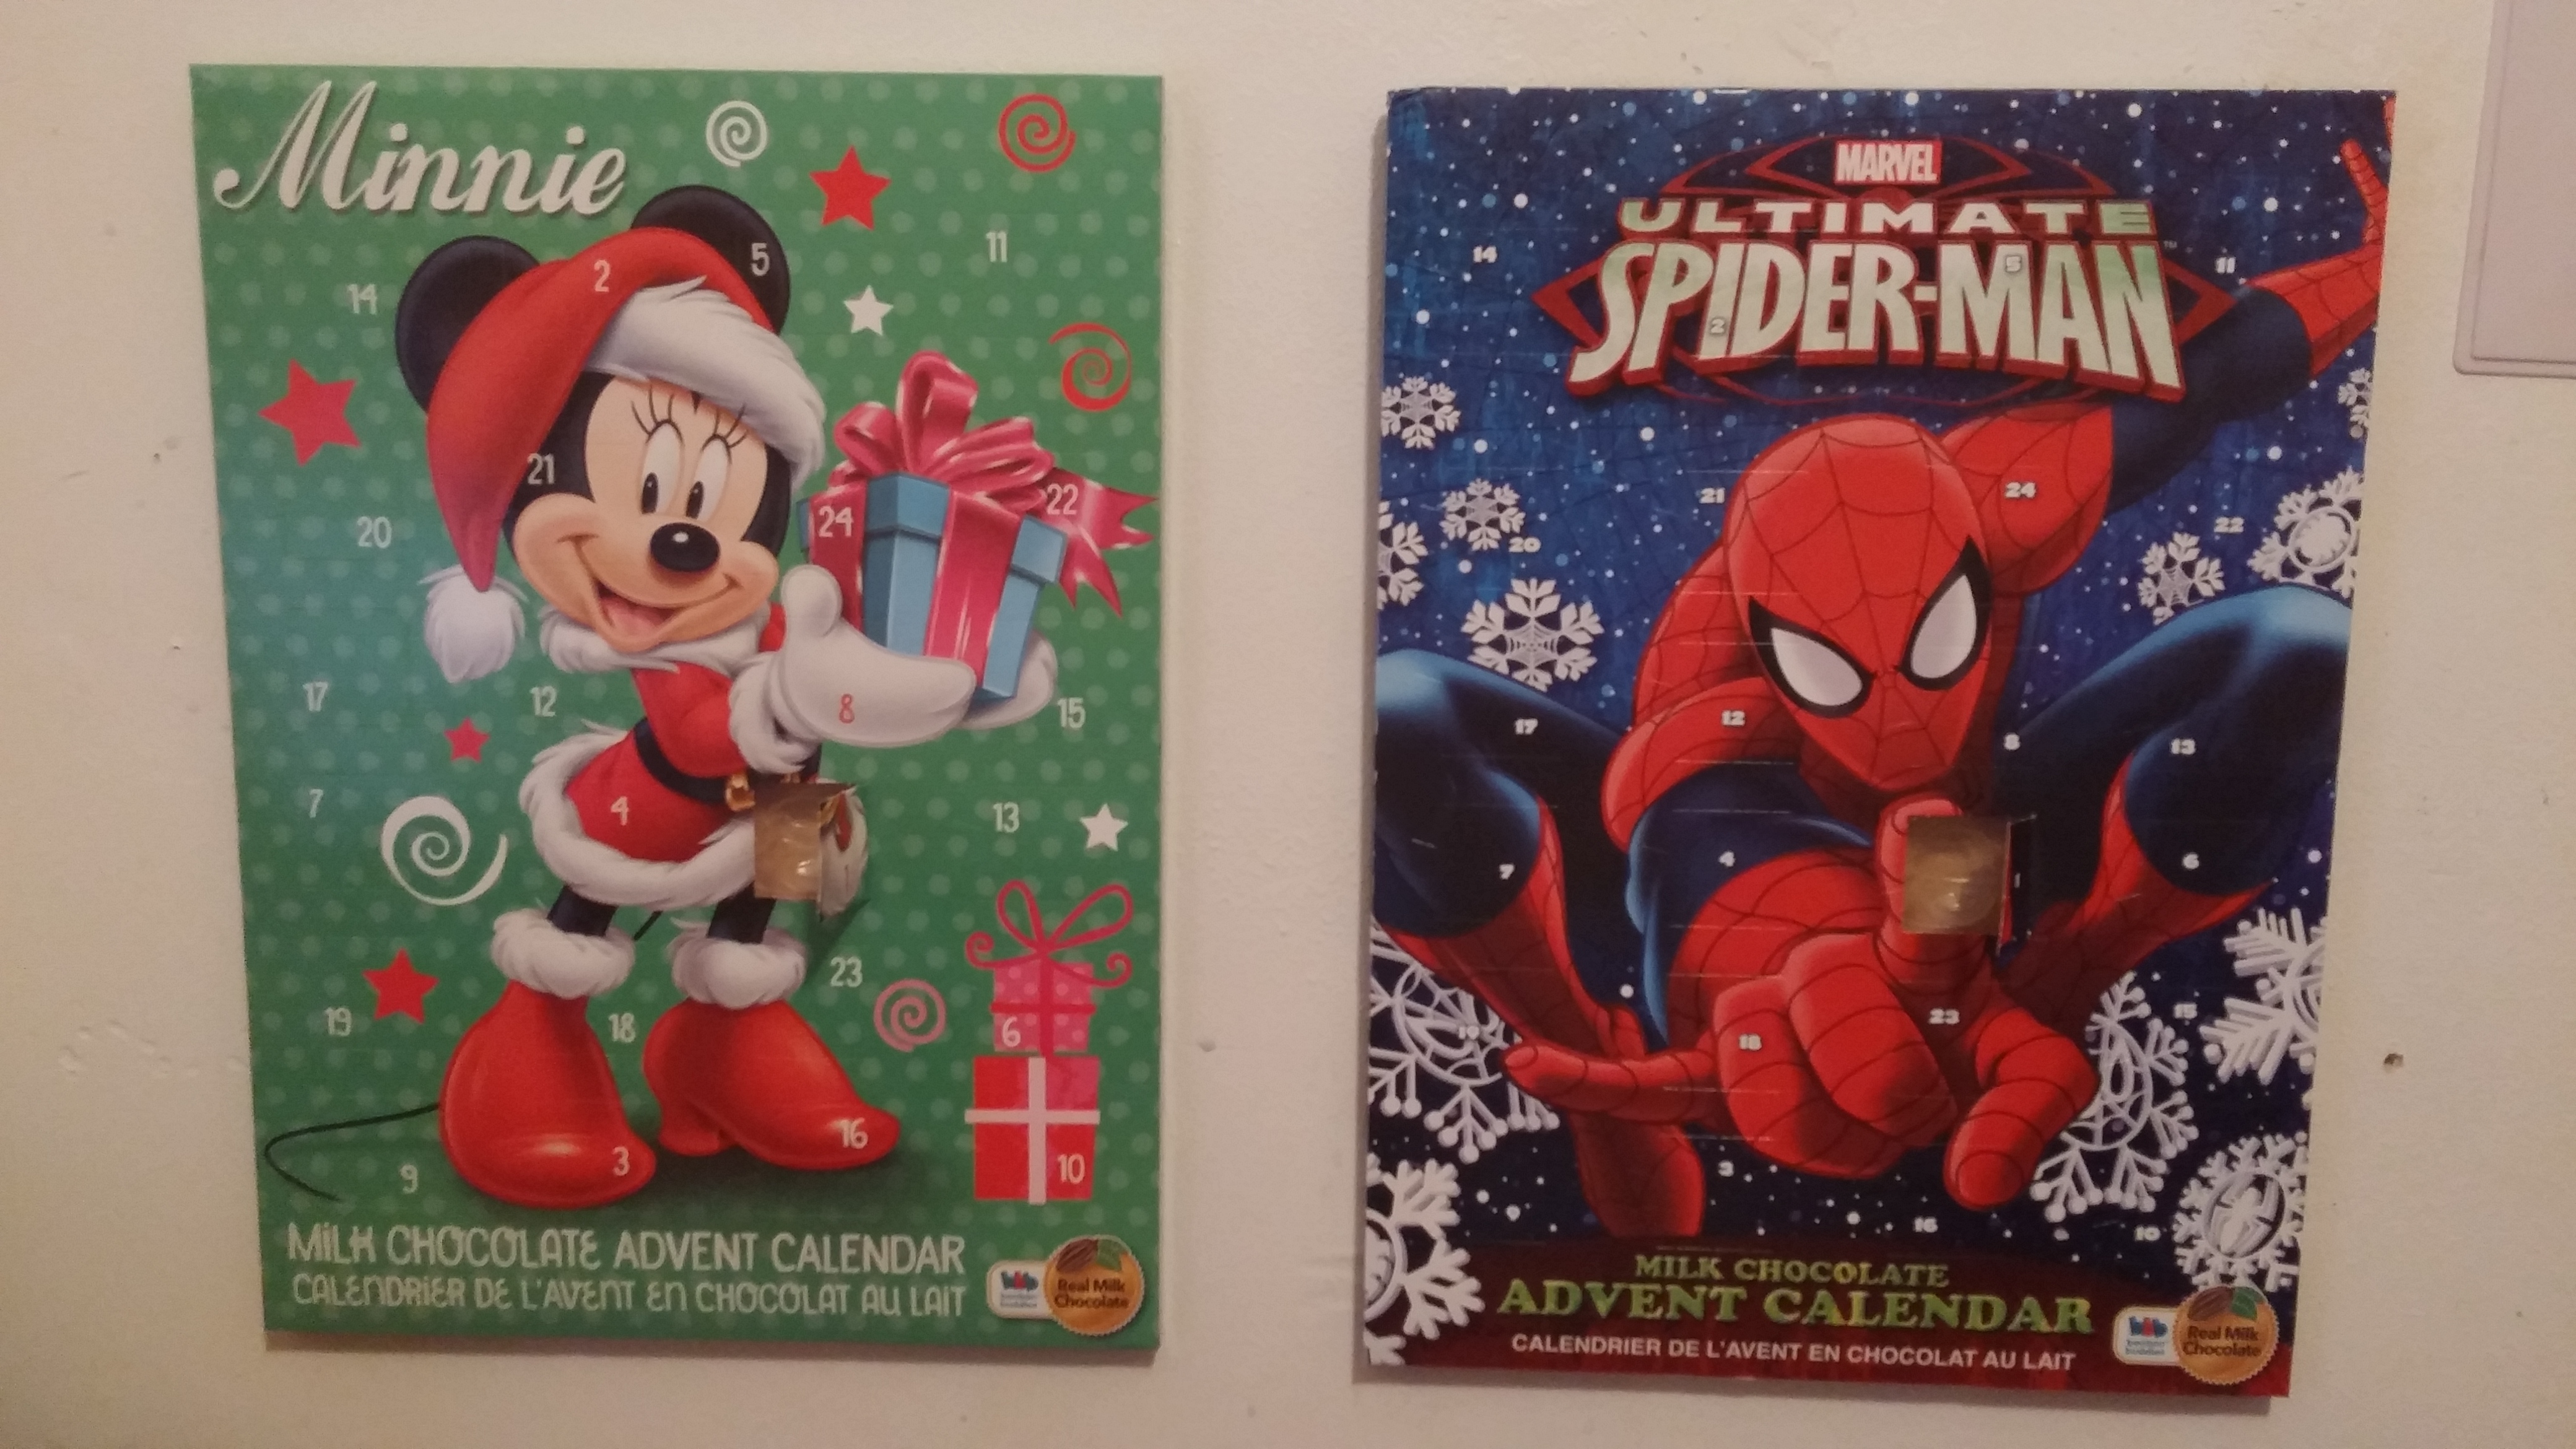 Two of the Advent calendars for this year